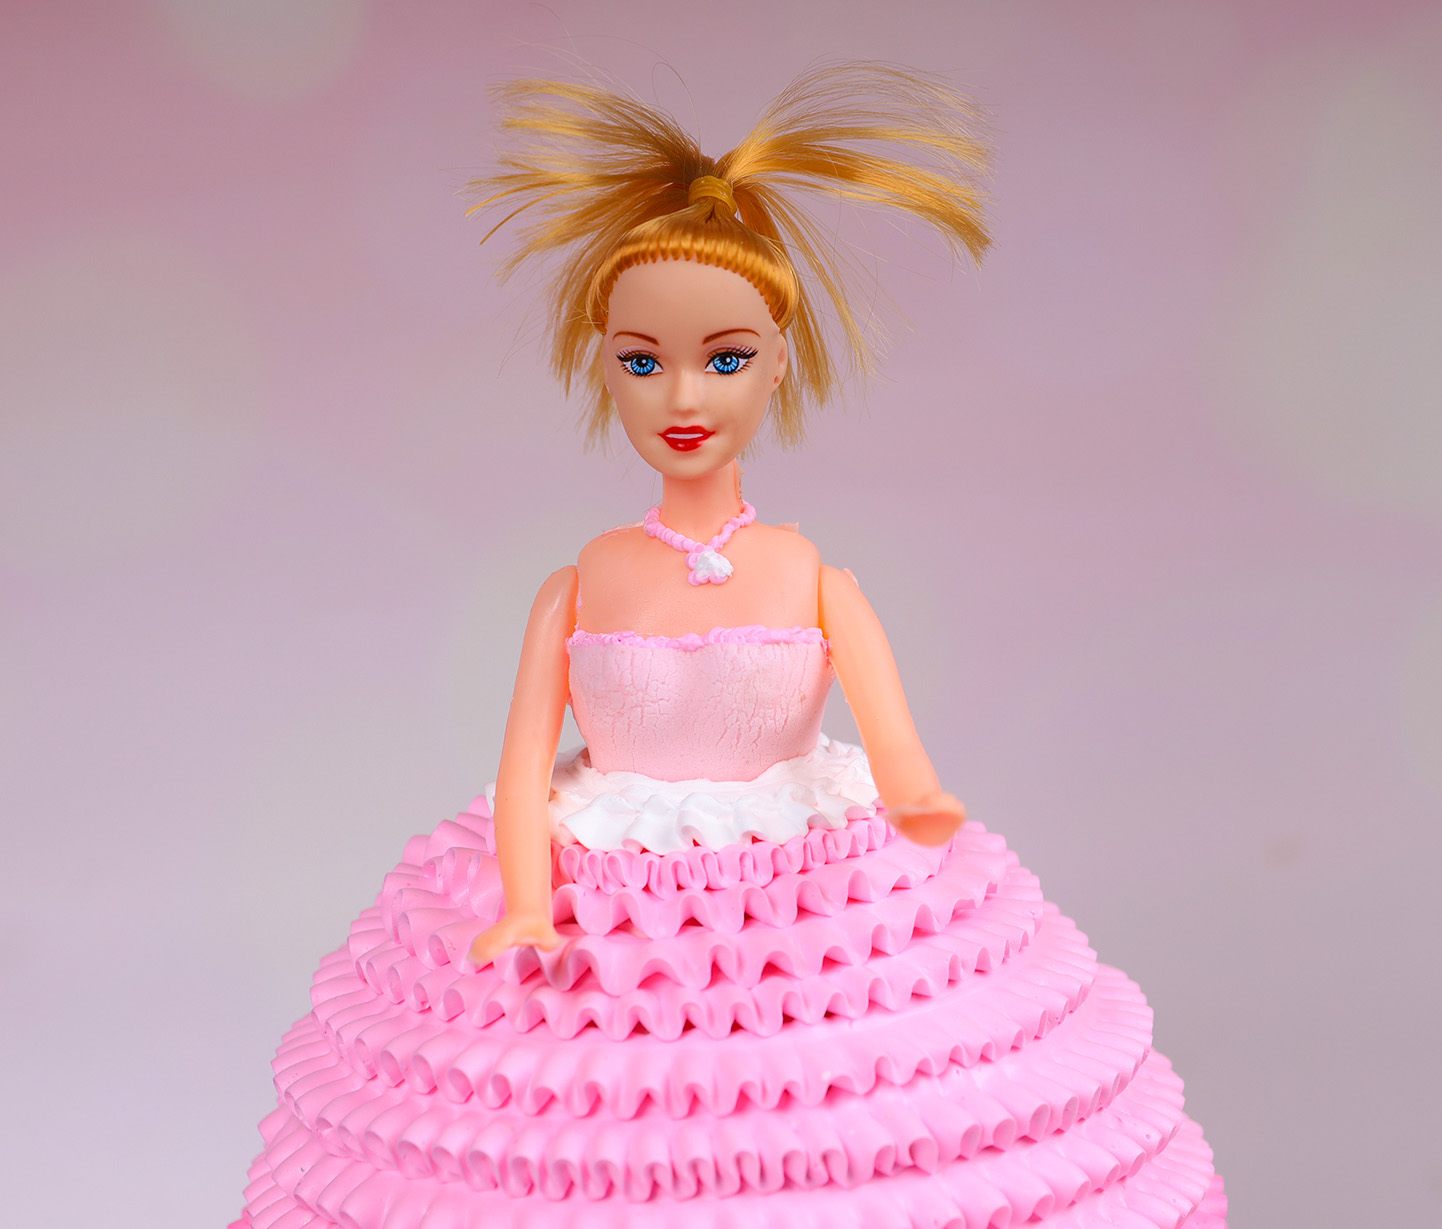 Where to find the perfect doll cake for birthday - Cakes and Bakes Stories